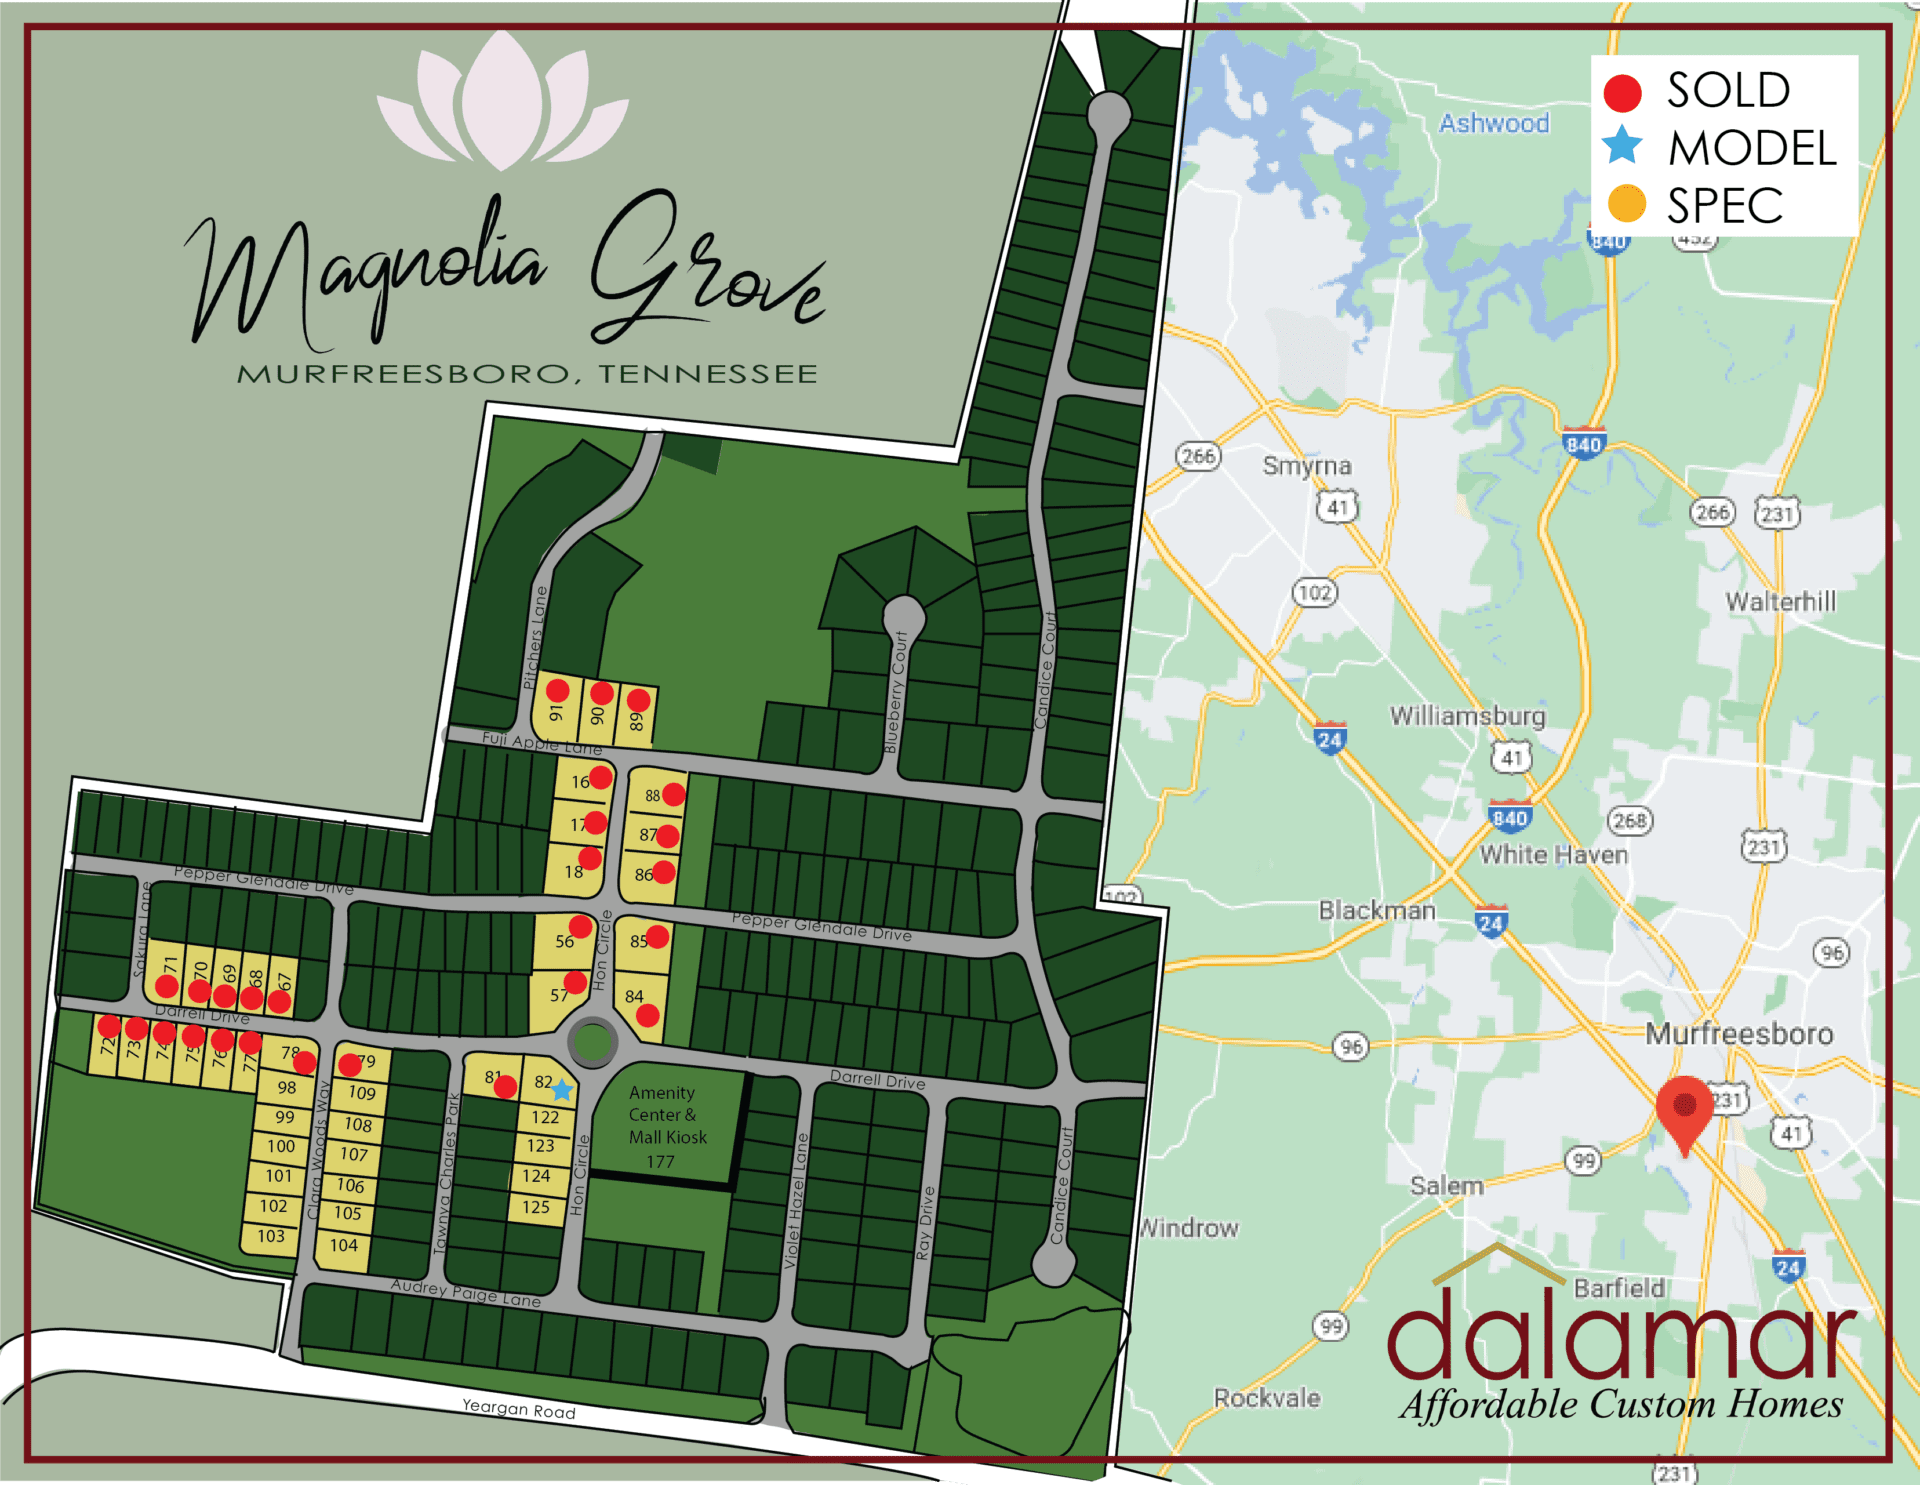 New Home Communities at Magnolia Grove displaying construction map for Murfreesboro, TN